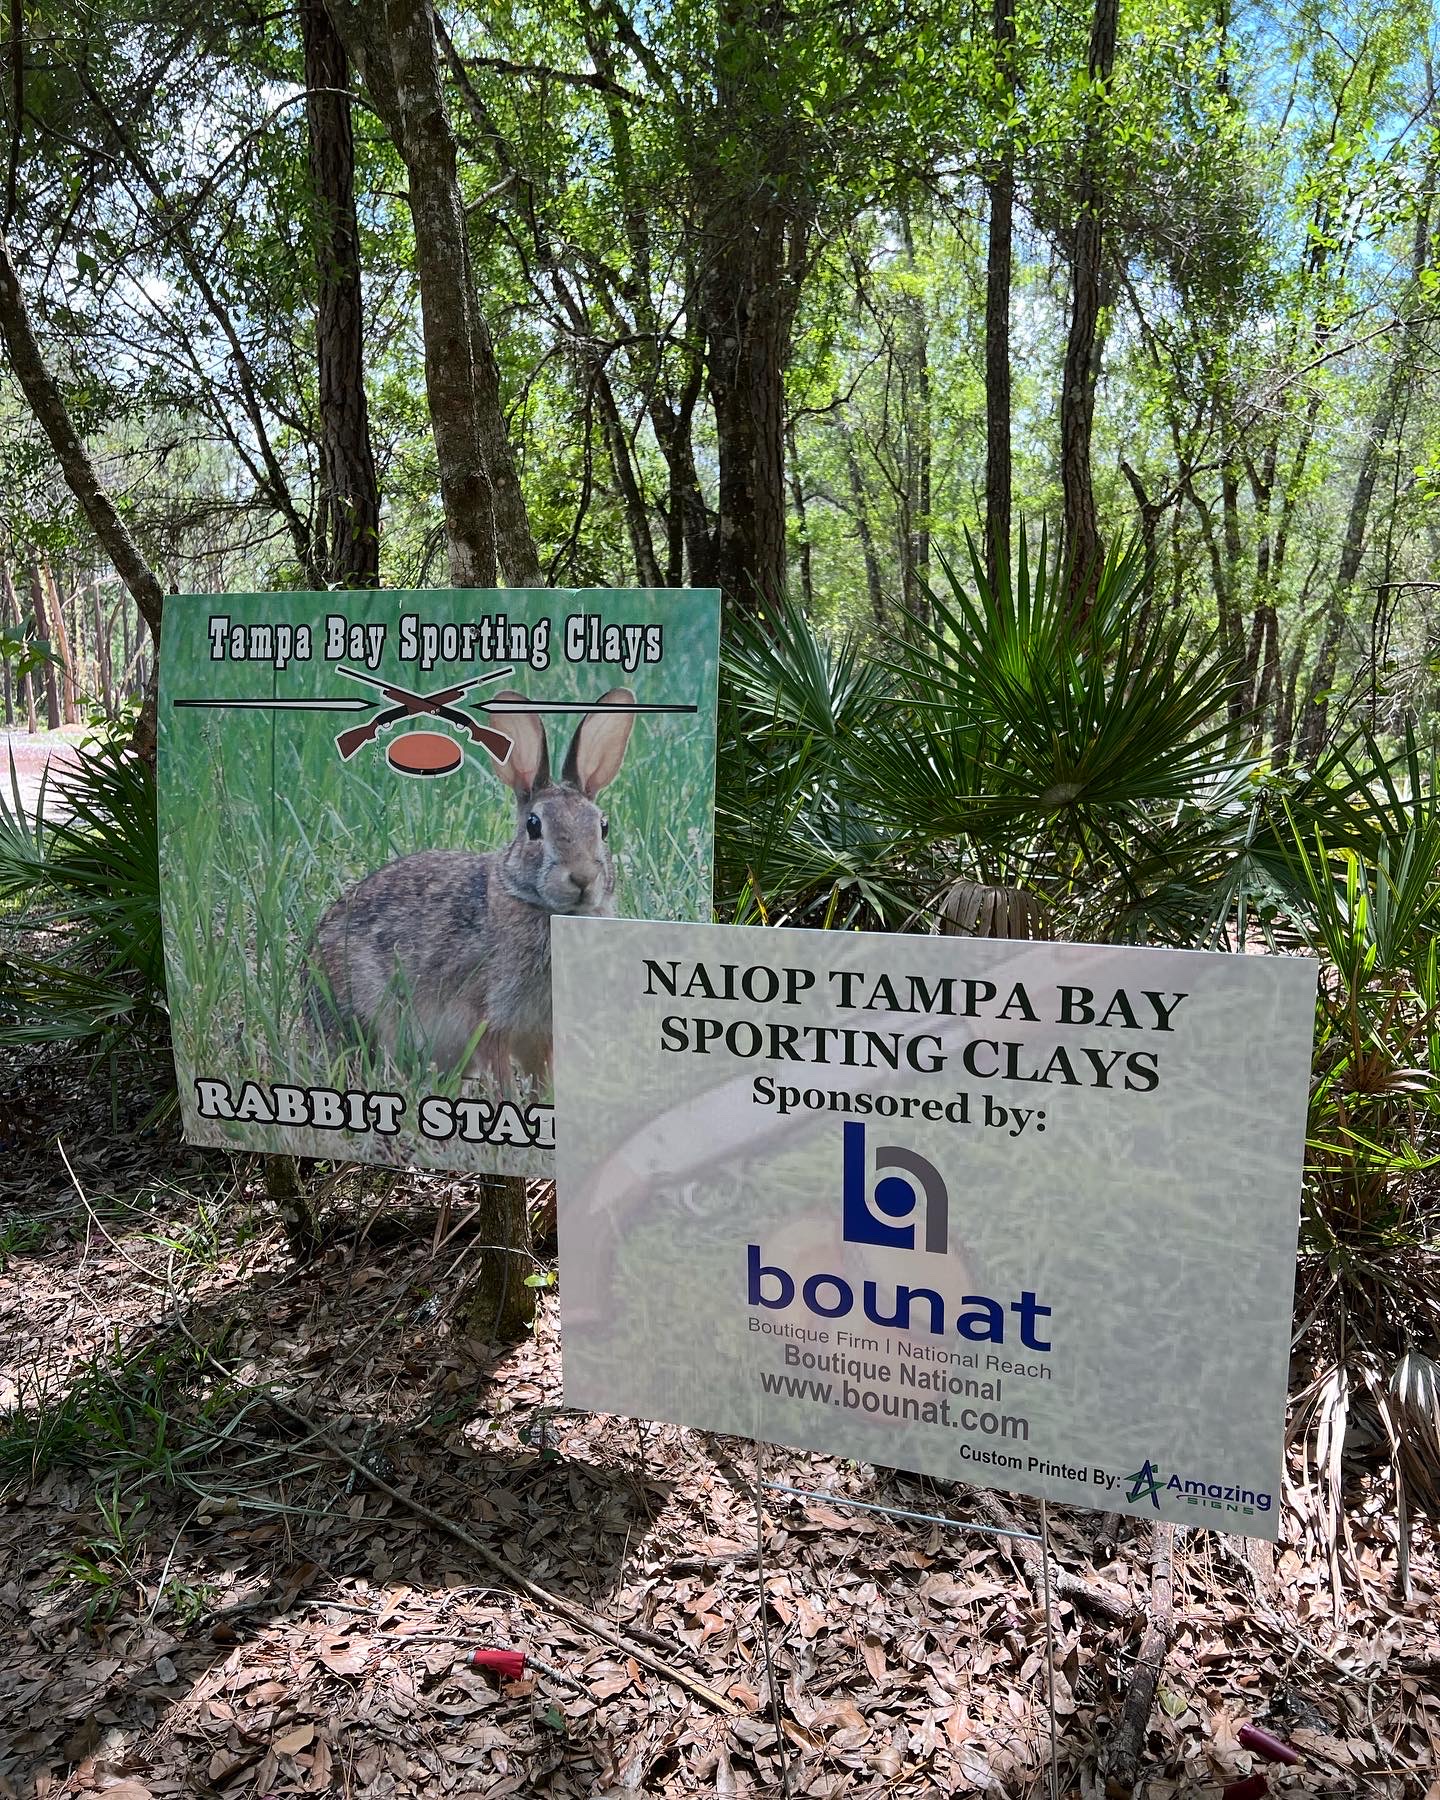 Bounat NAIOP 12th Annual Sporting Clays Event